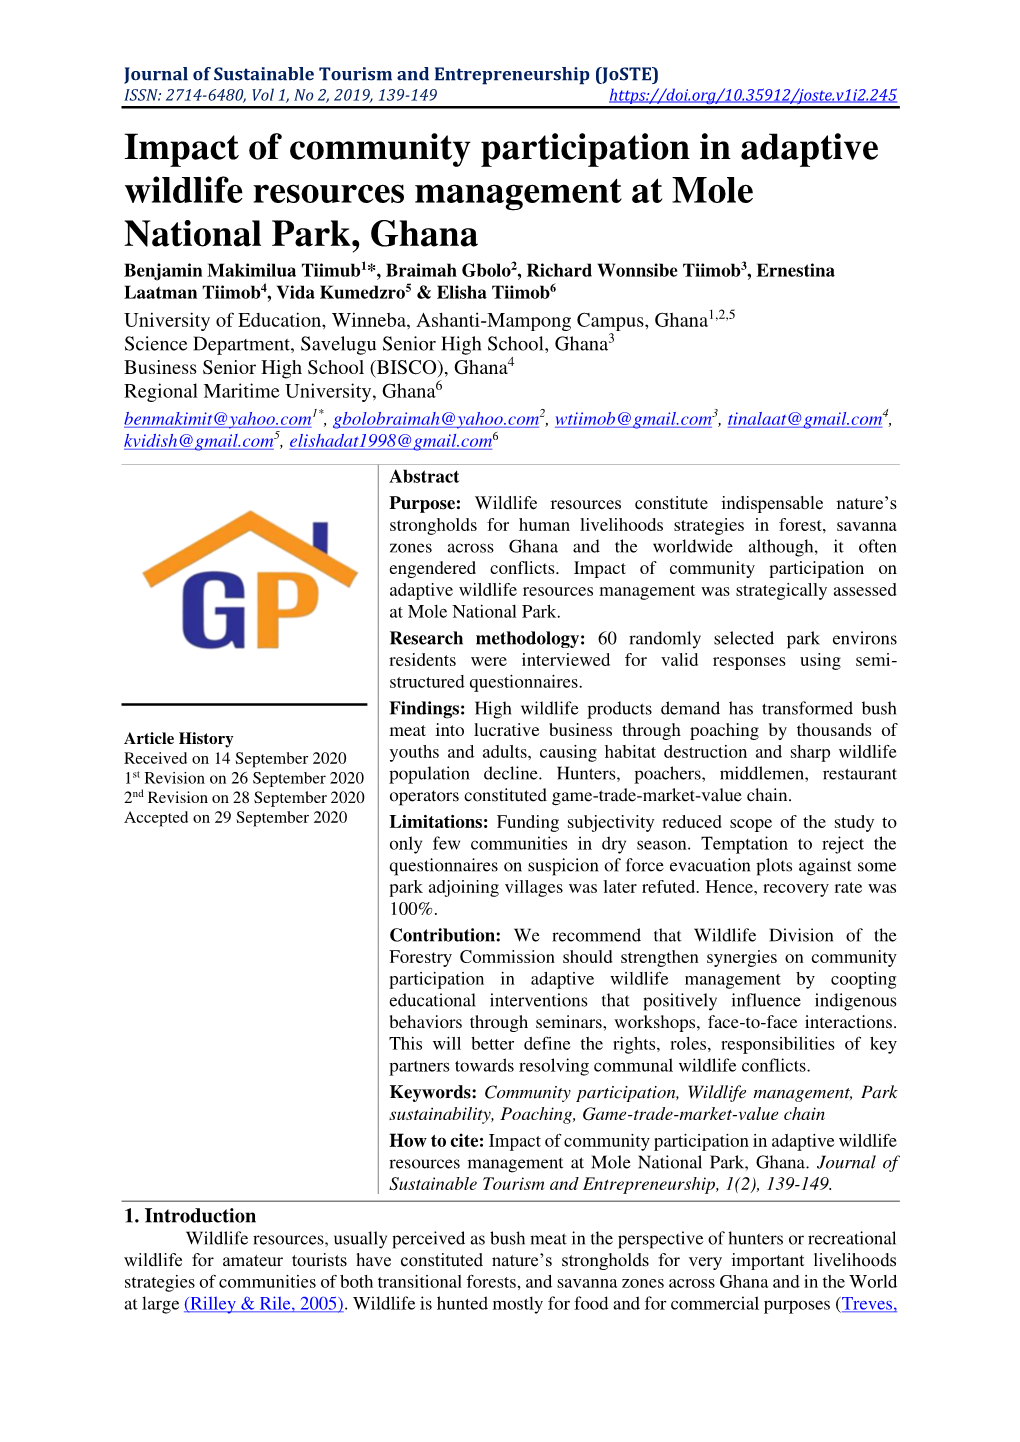 Impact of Community Participation in Adaptive Wildlife Resources Management at Mole National Park, Ghana